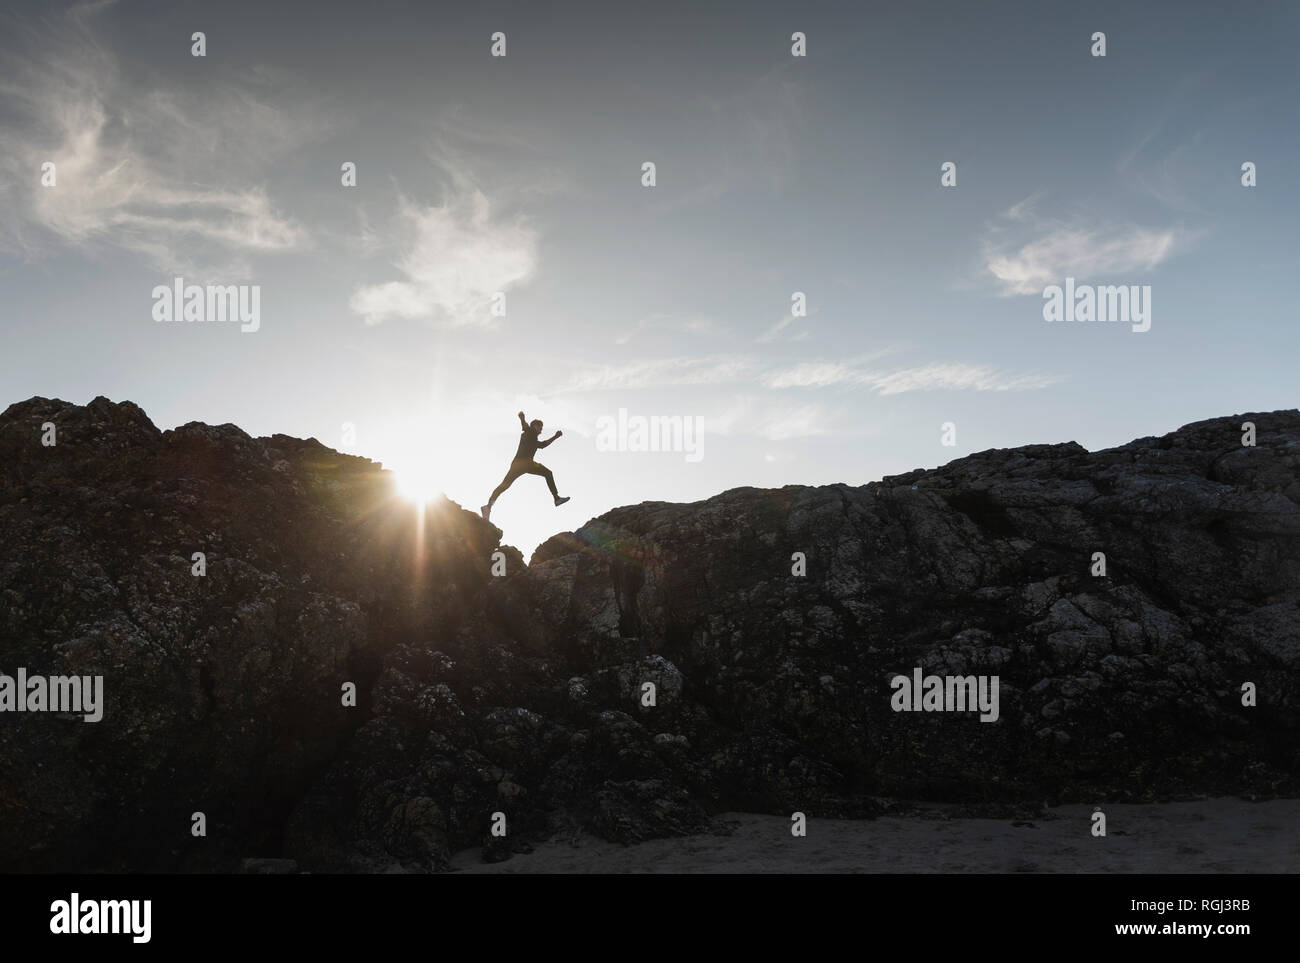 France, Brittany, young man jumping on a rock at sunset Stock Photo